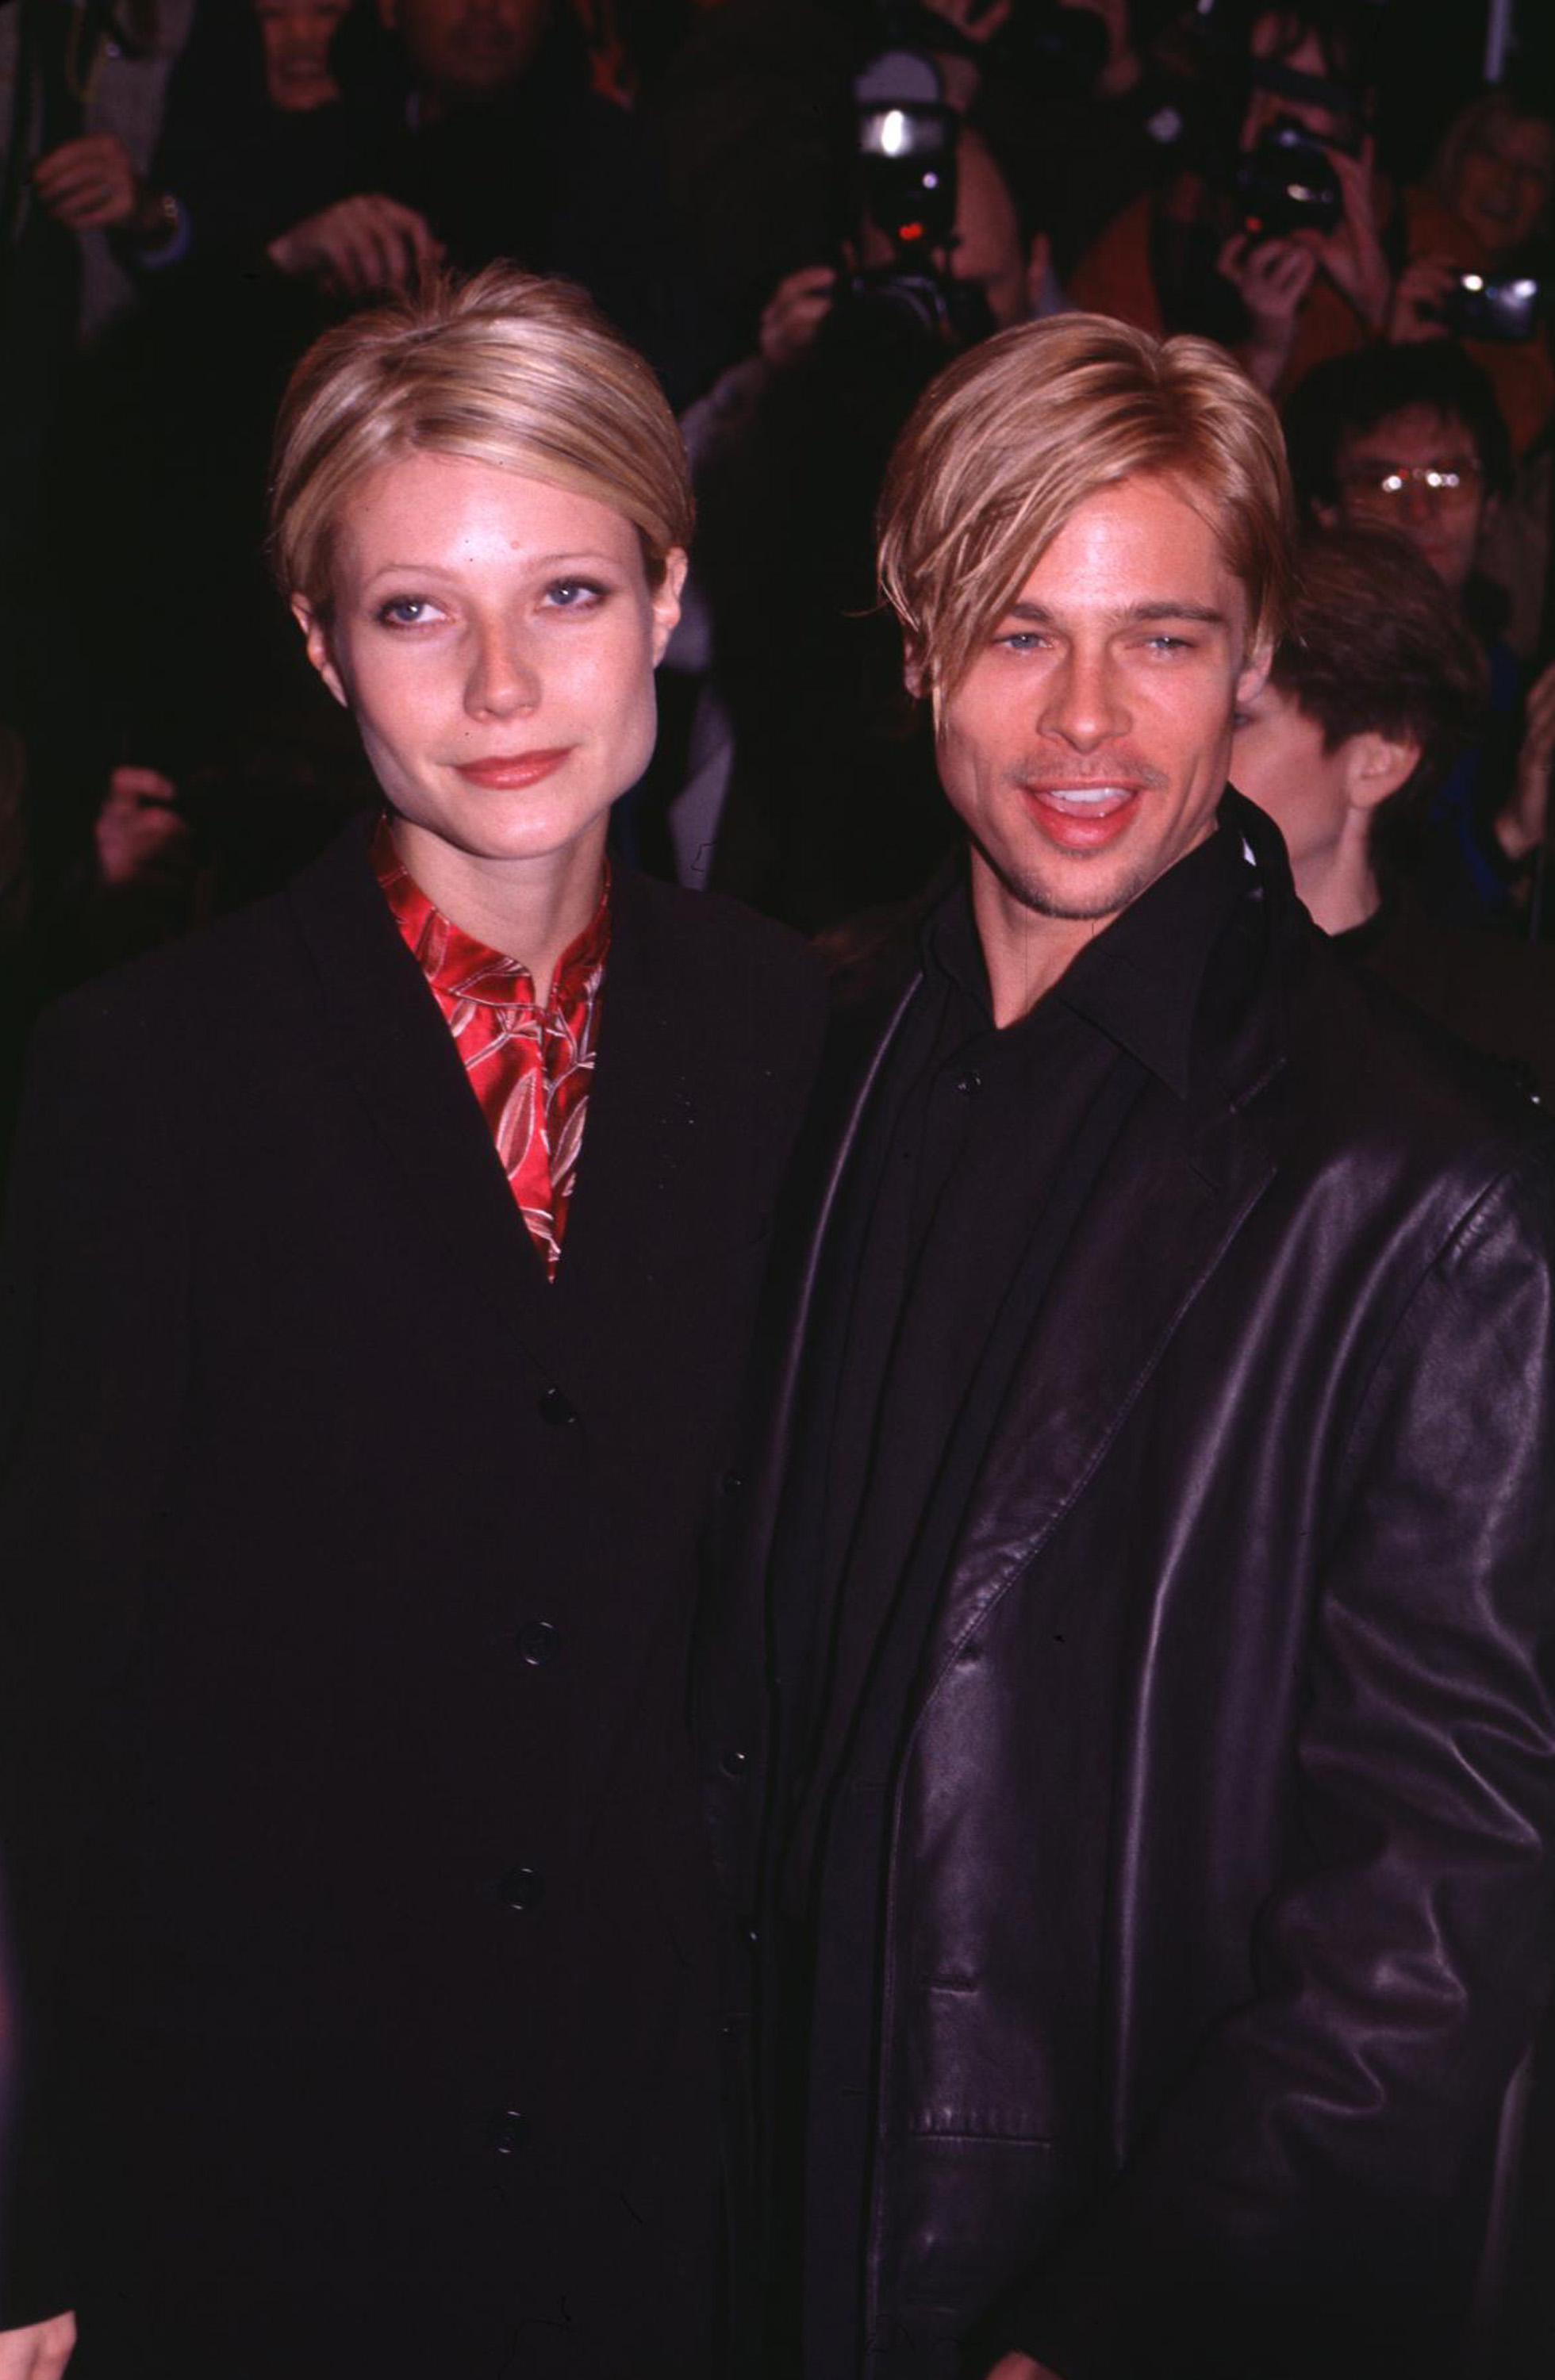 Gwyneth Paltrow and Brad Pitt in New York City, New York, United States, 1997 | Source: Getty Images